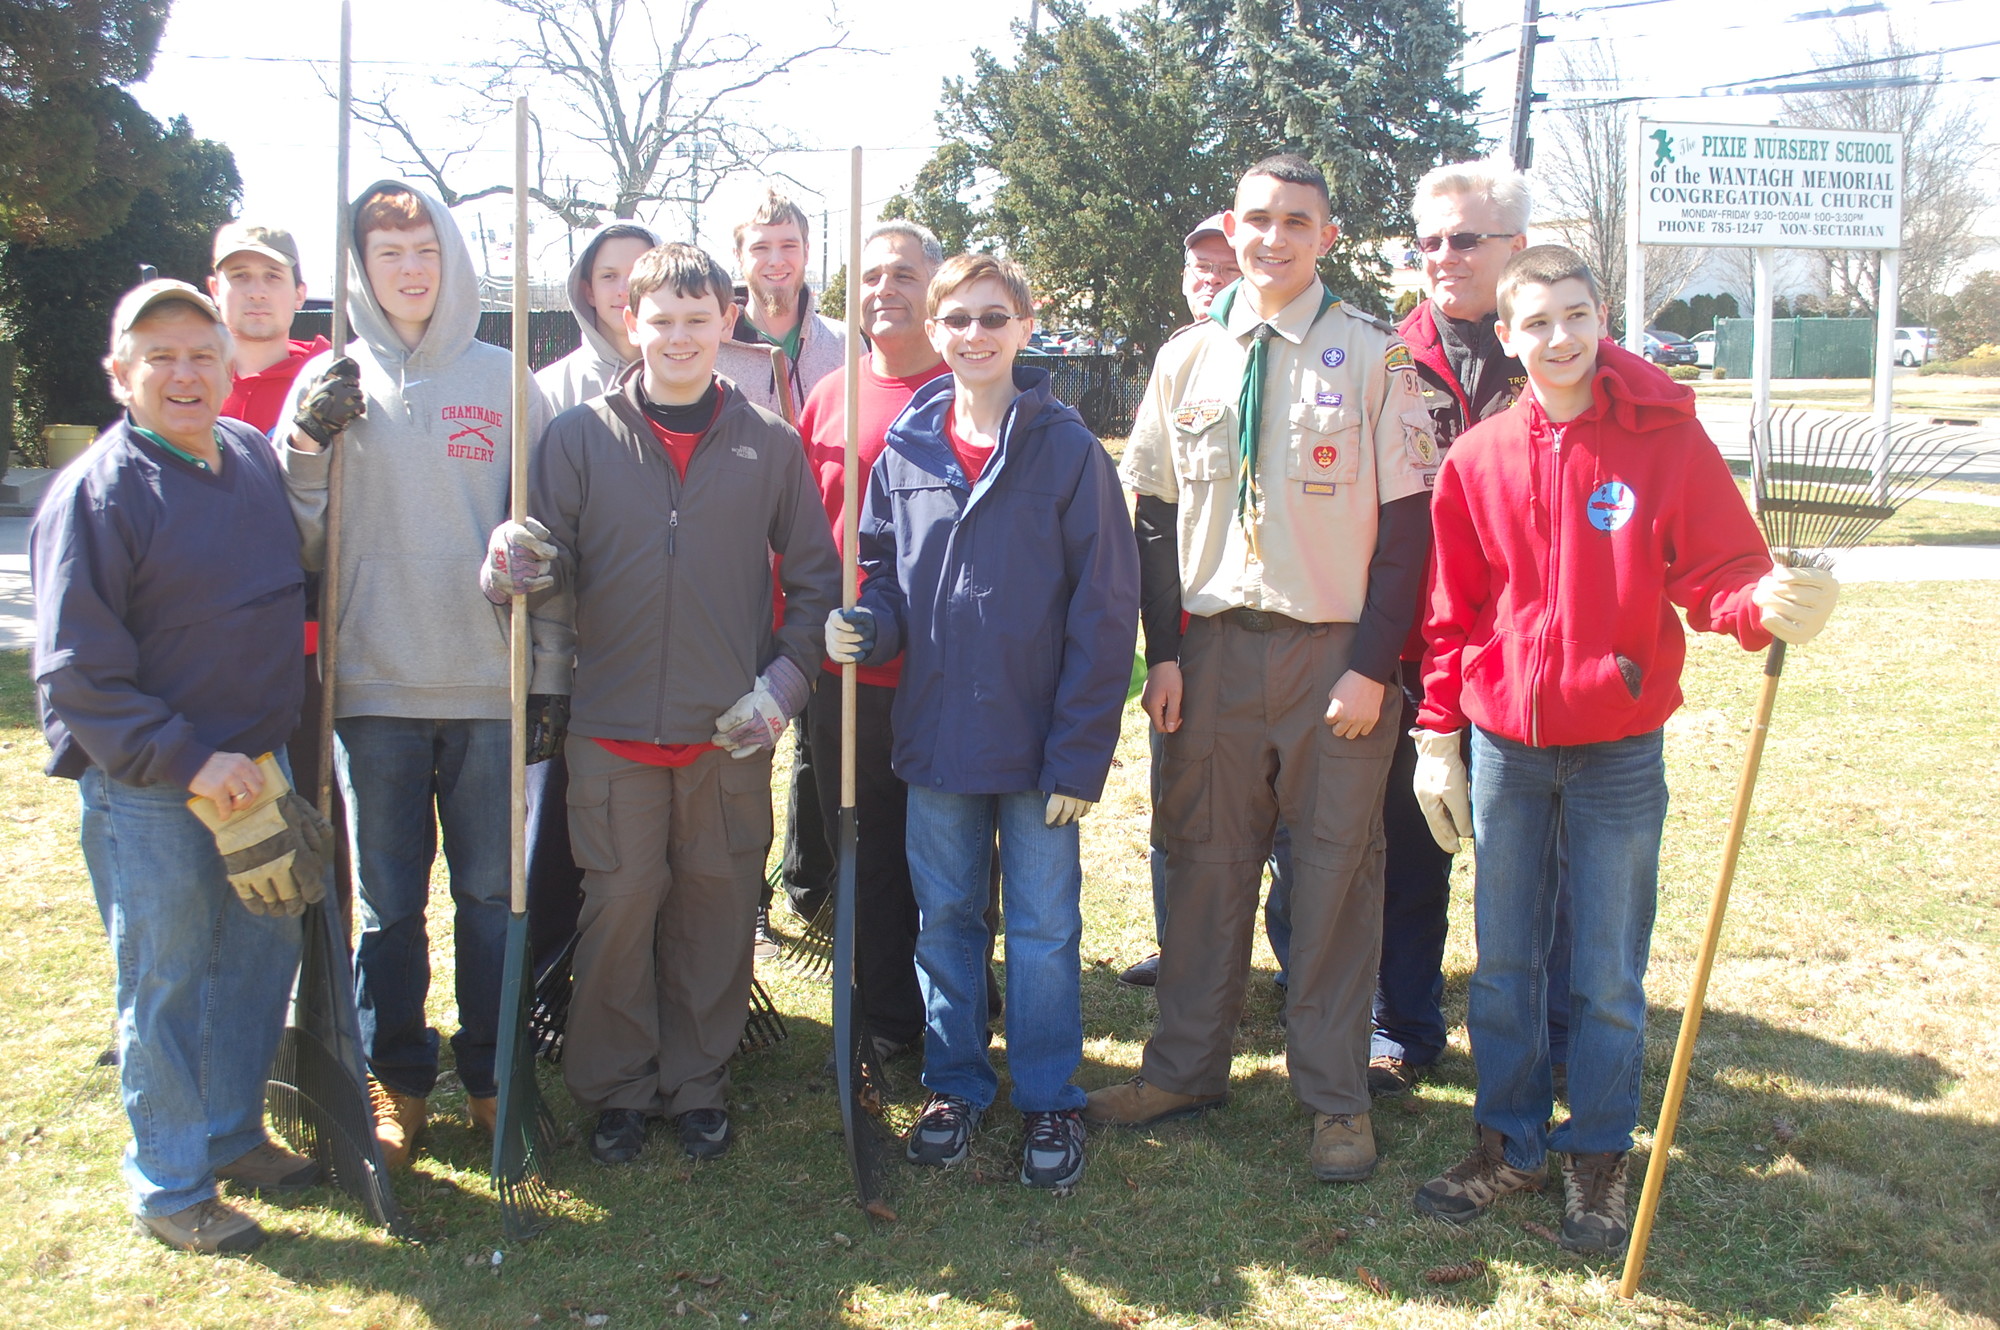 Stephen Vaiano, third from right, was joined by his volunteers for a cleanup of the grounds at the Wantagh Memorial Congregational Church on April 4.